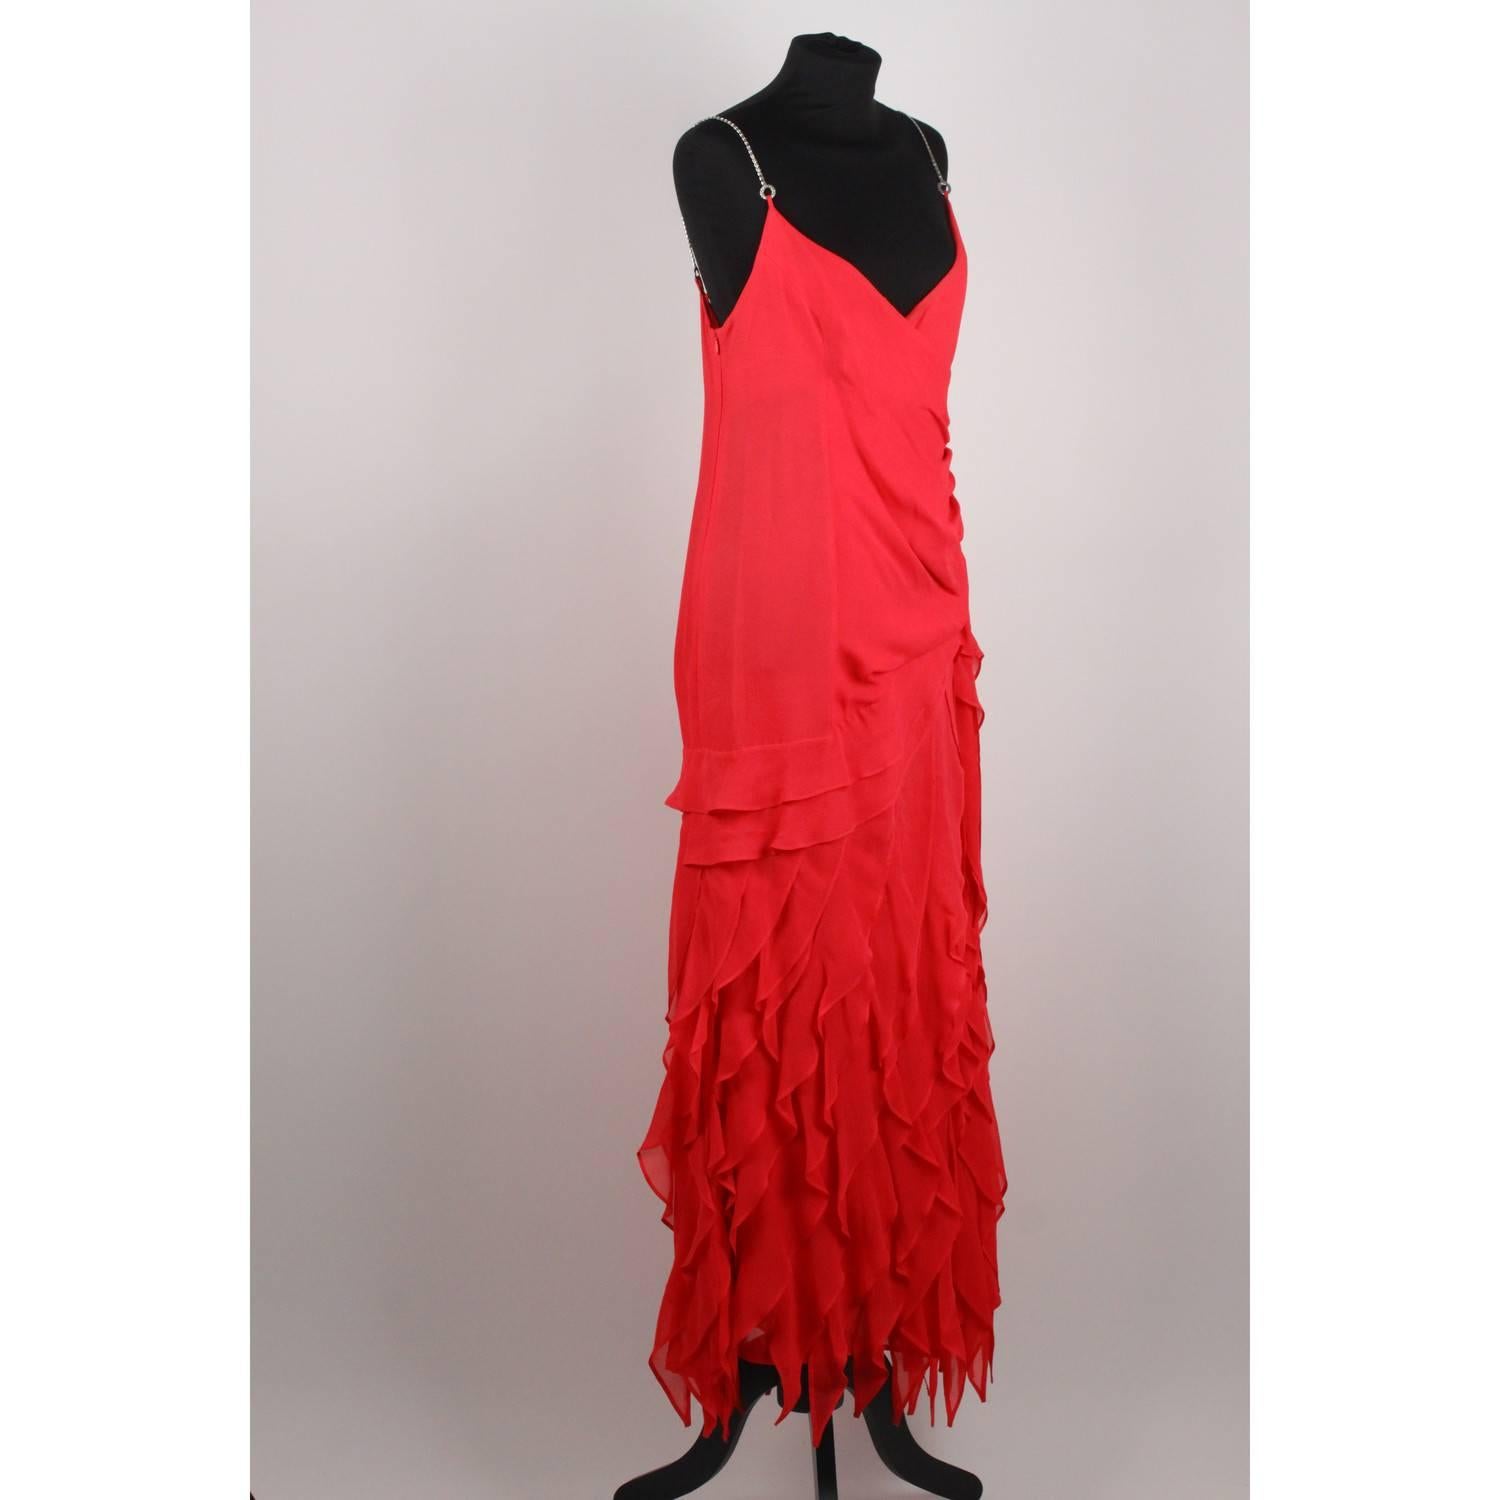 - GAI MATTIOLO - Made in Italy 
- Scoop neckline
- Sleeveless styling
- Rhinestones shoulder straps
- Gathered pleats on the side
- Ruffled skirt
- Side zip closure
- Size: 44 IT - It should correspond to a MEDIUM size